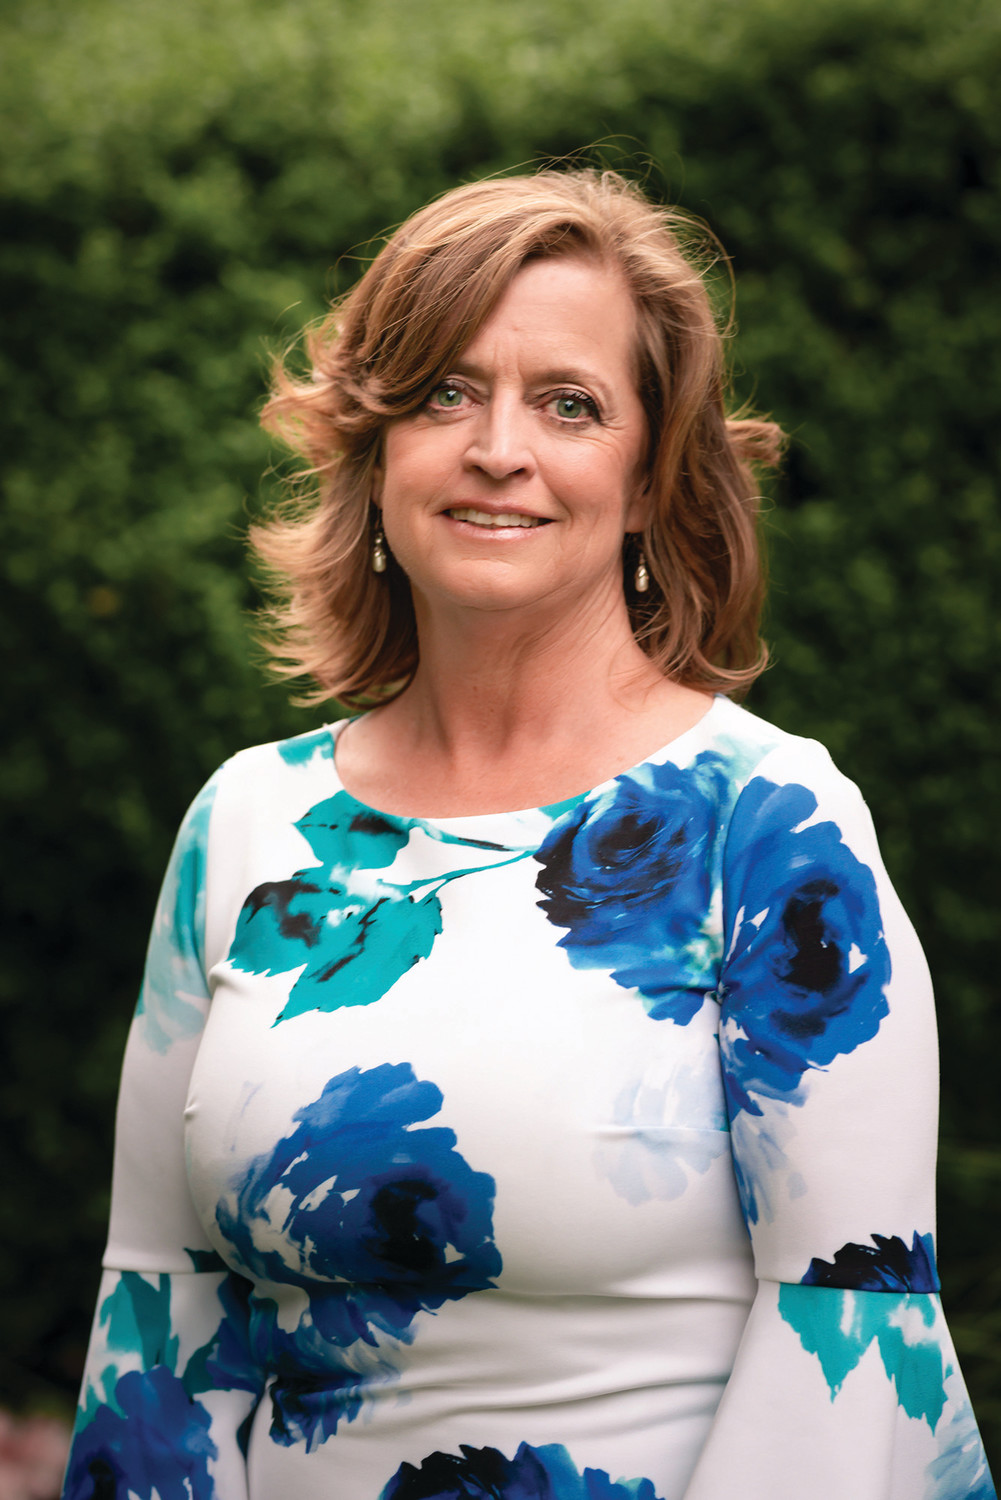 Judy Griffin
Party: Democrat
Age: 55
Hometown: Rockville Centre
Profession: Director Of Community Outreach office of Sen. Todd Kaminsky
Family: Husband Mike and four children (Kayla, Erin, Conor and Sean)